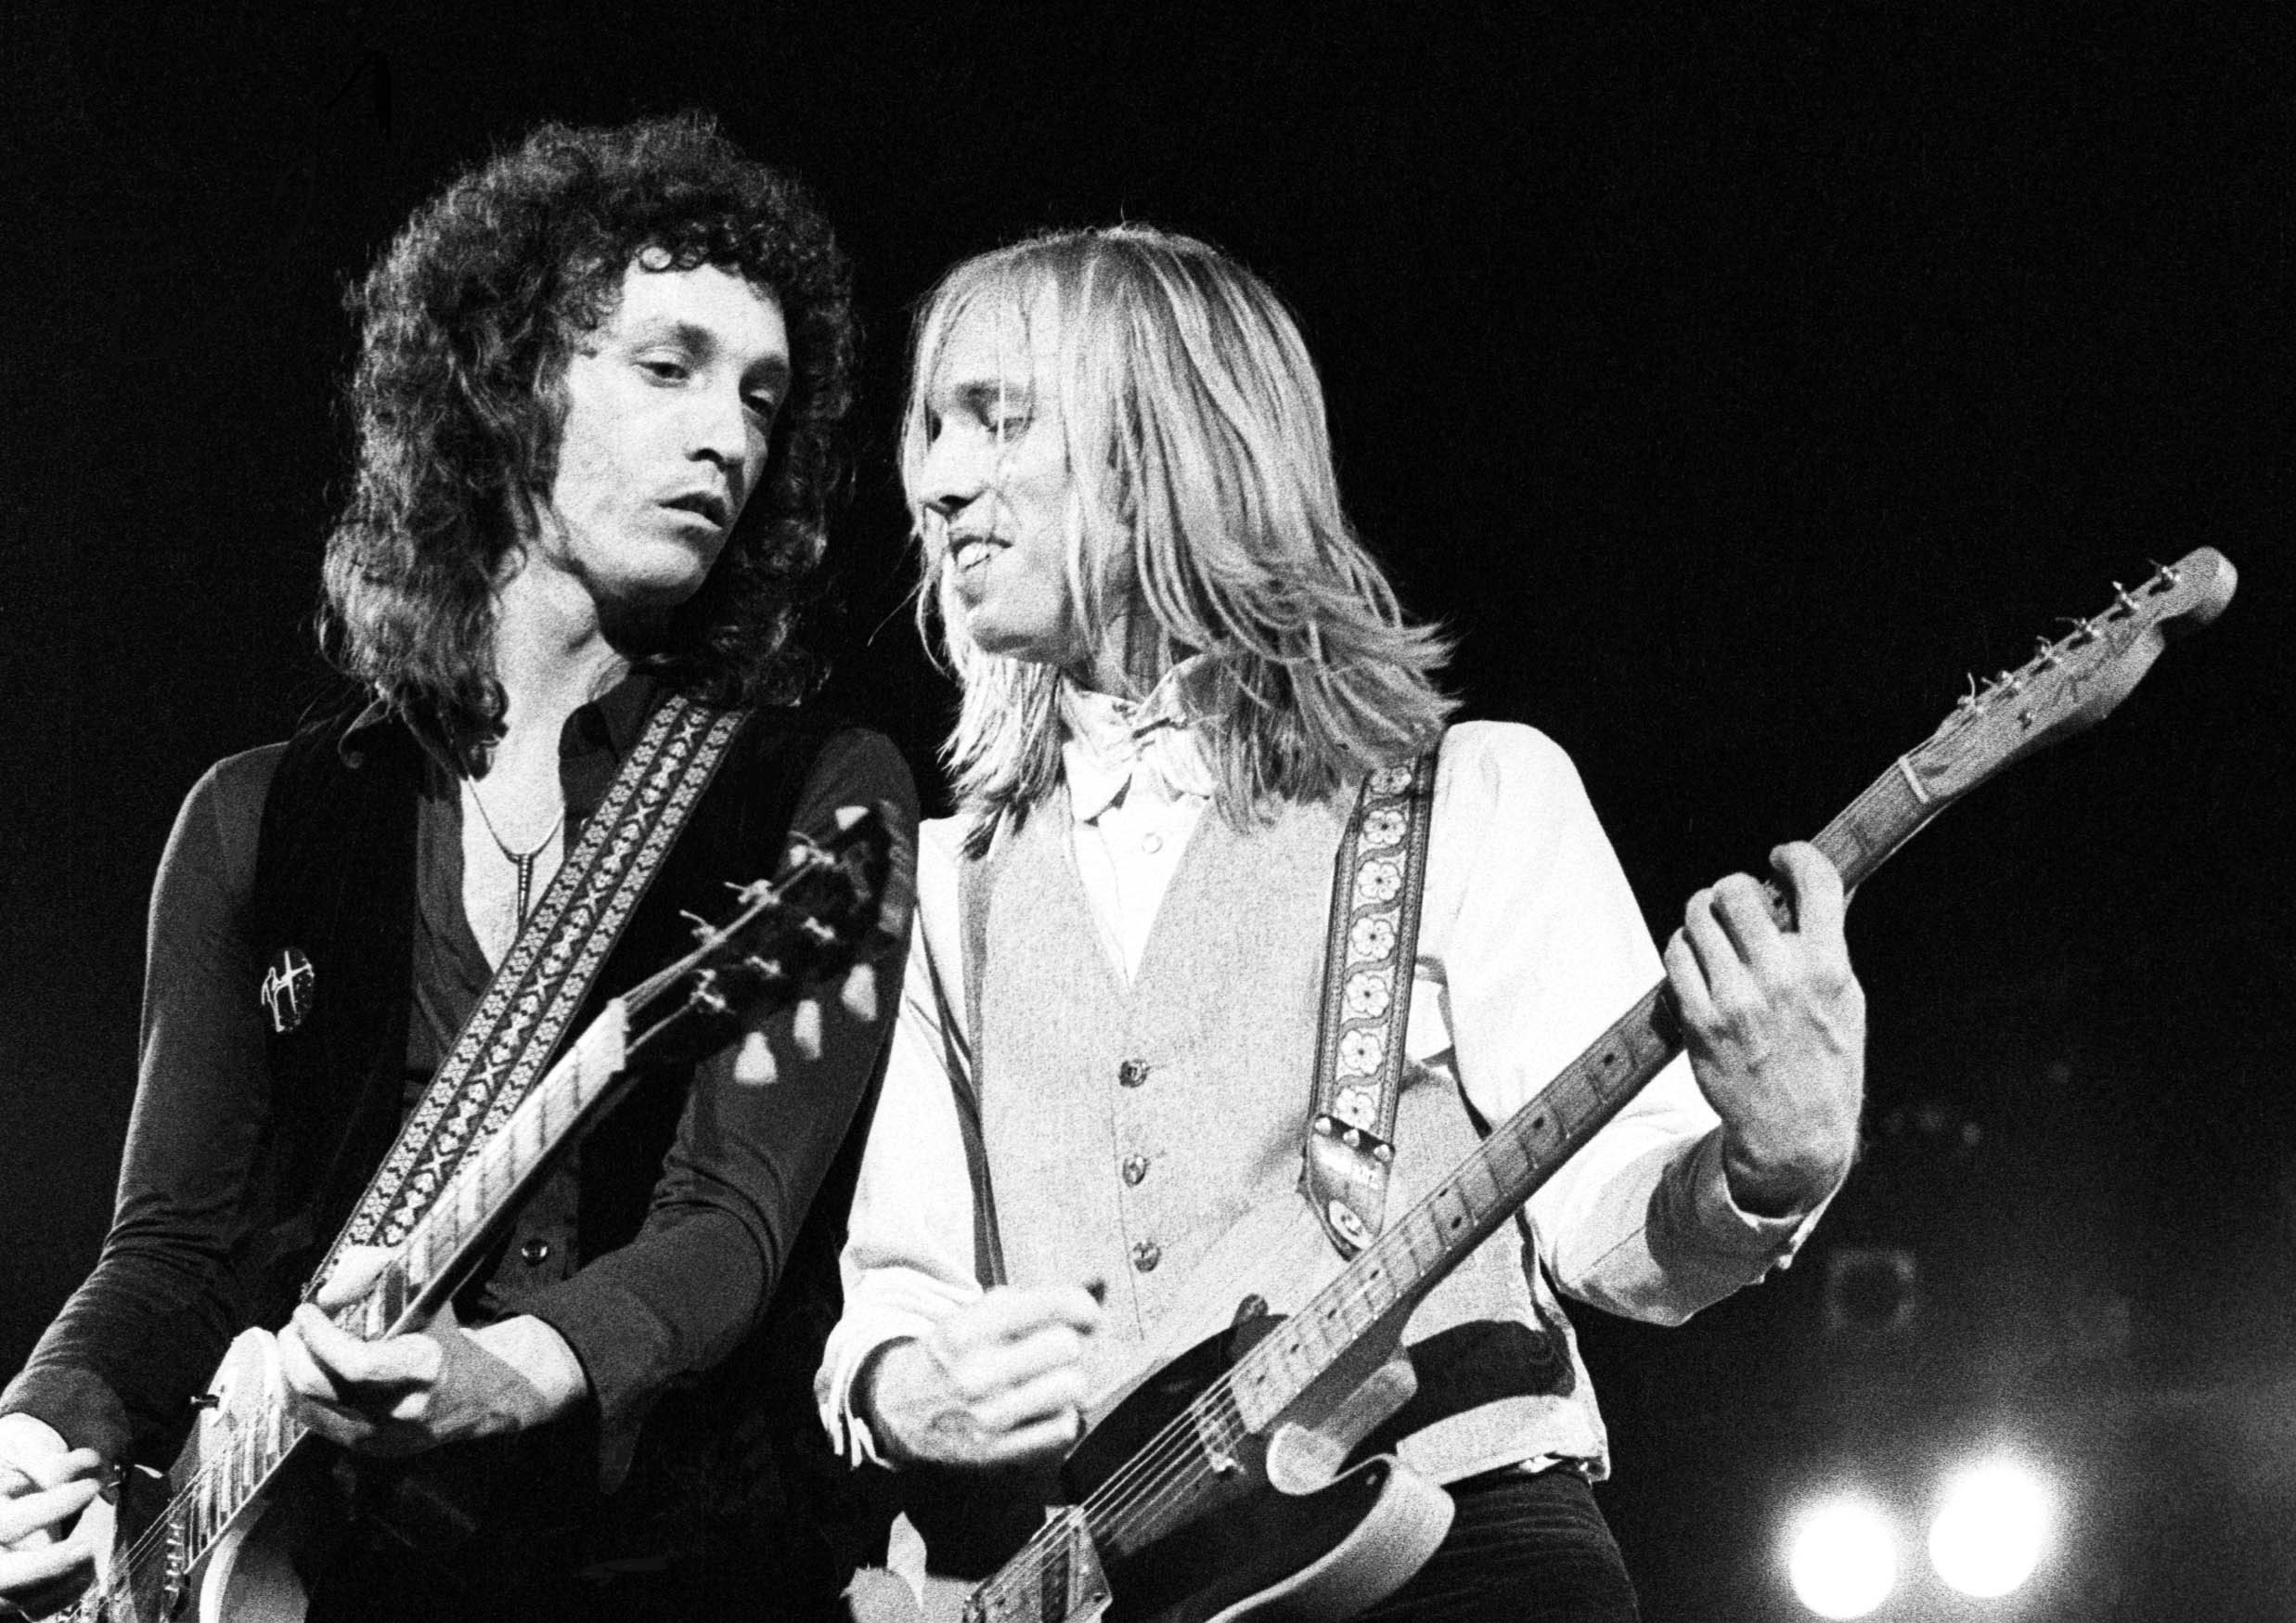 A black and white picture of Tom Petty and his bandmate Mike Campbell playin guitar together.